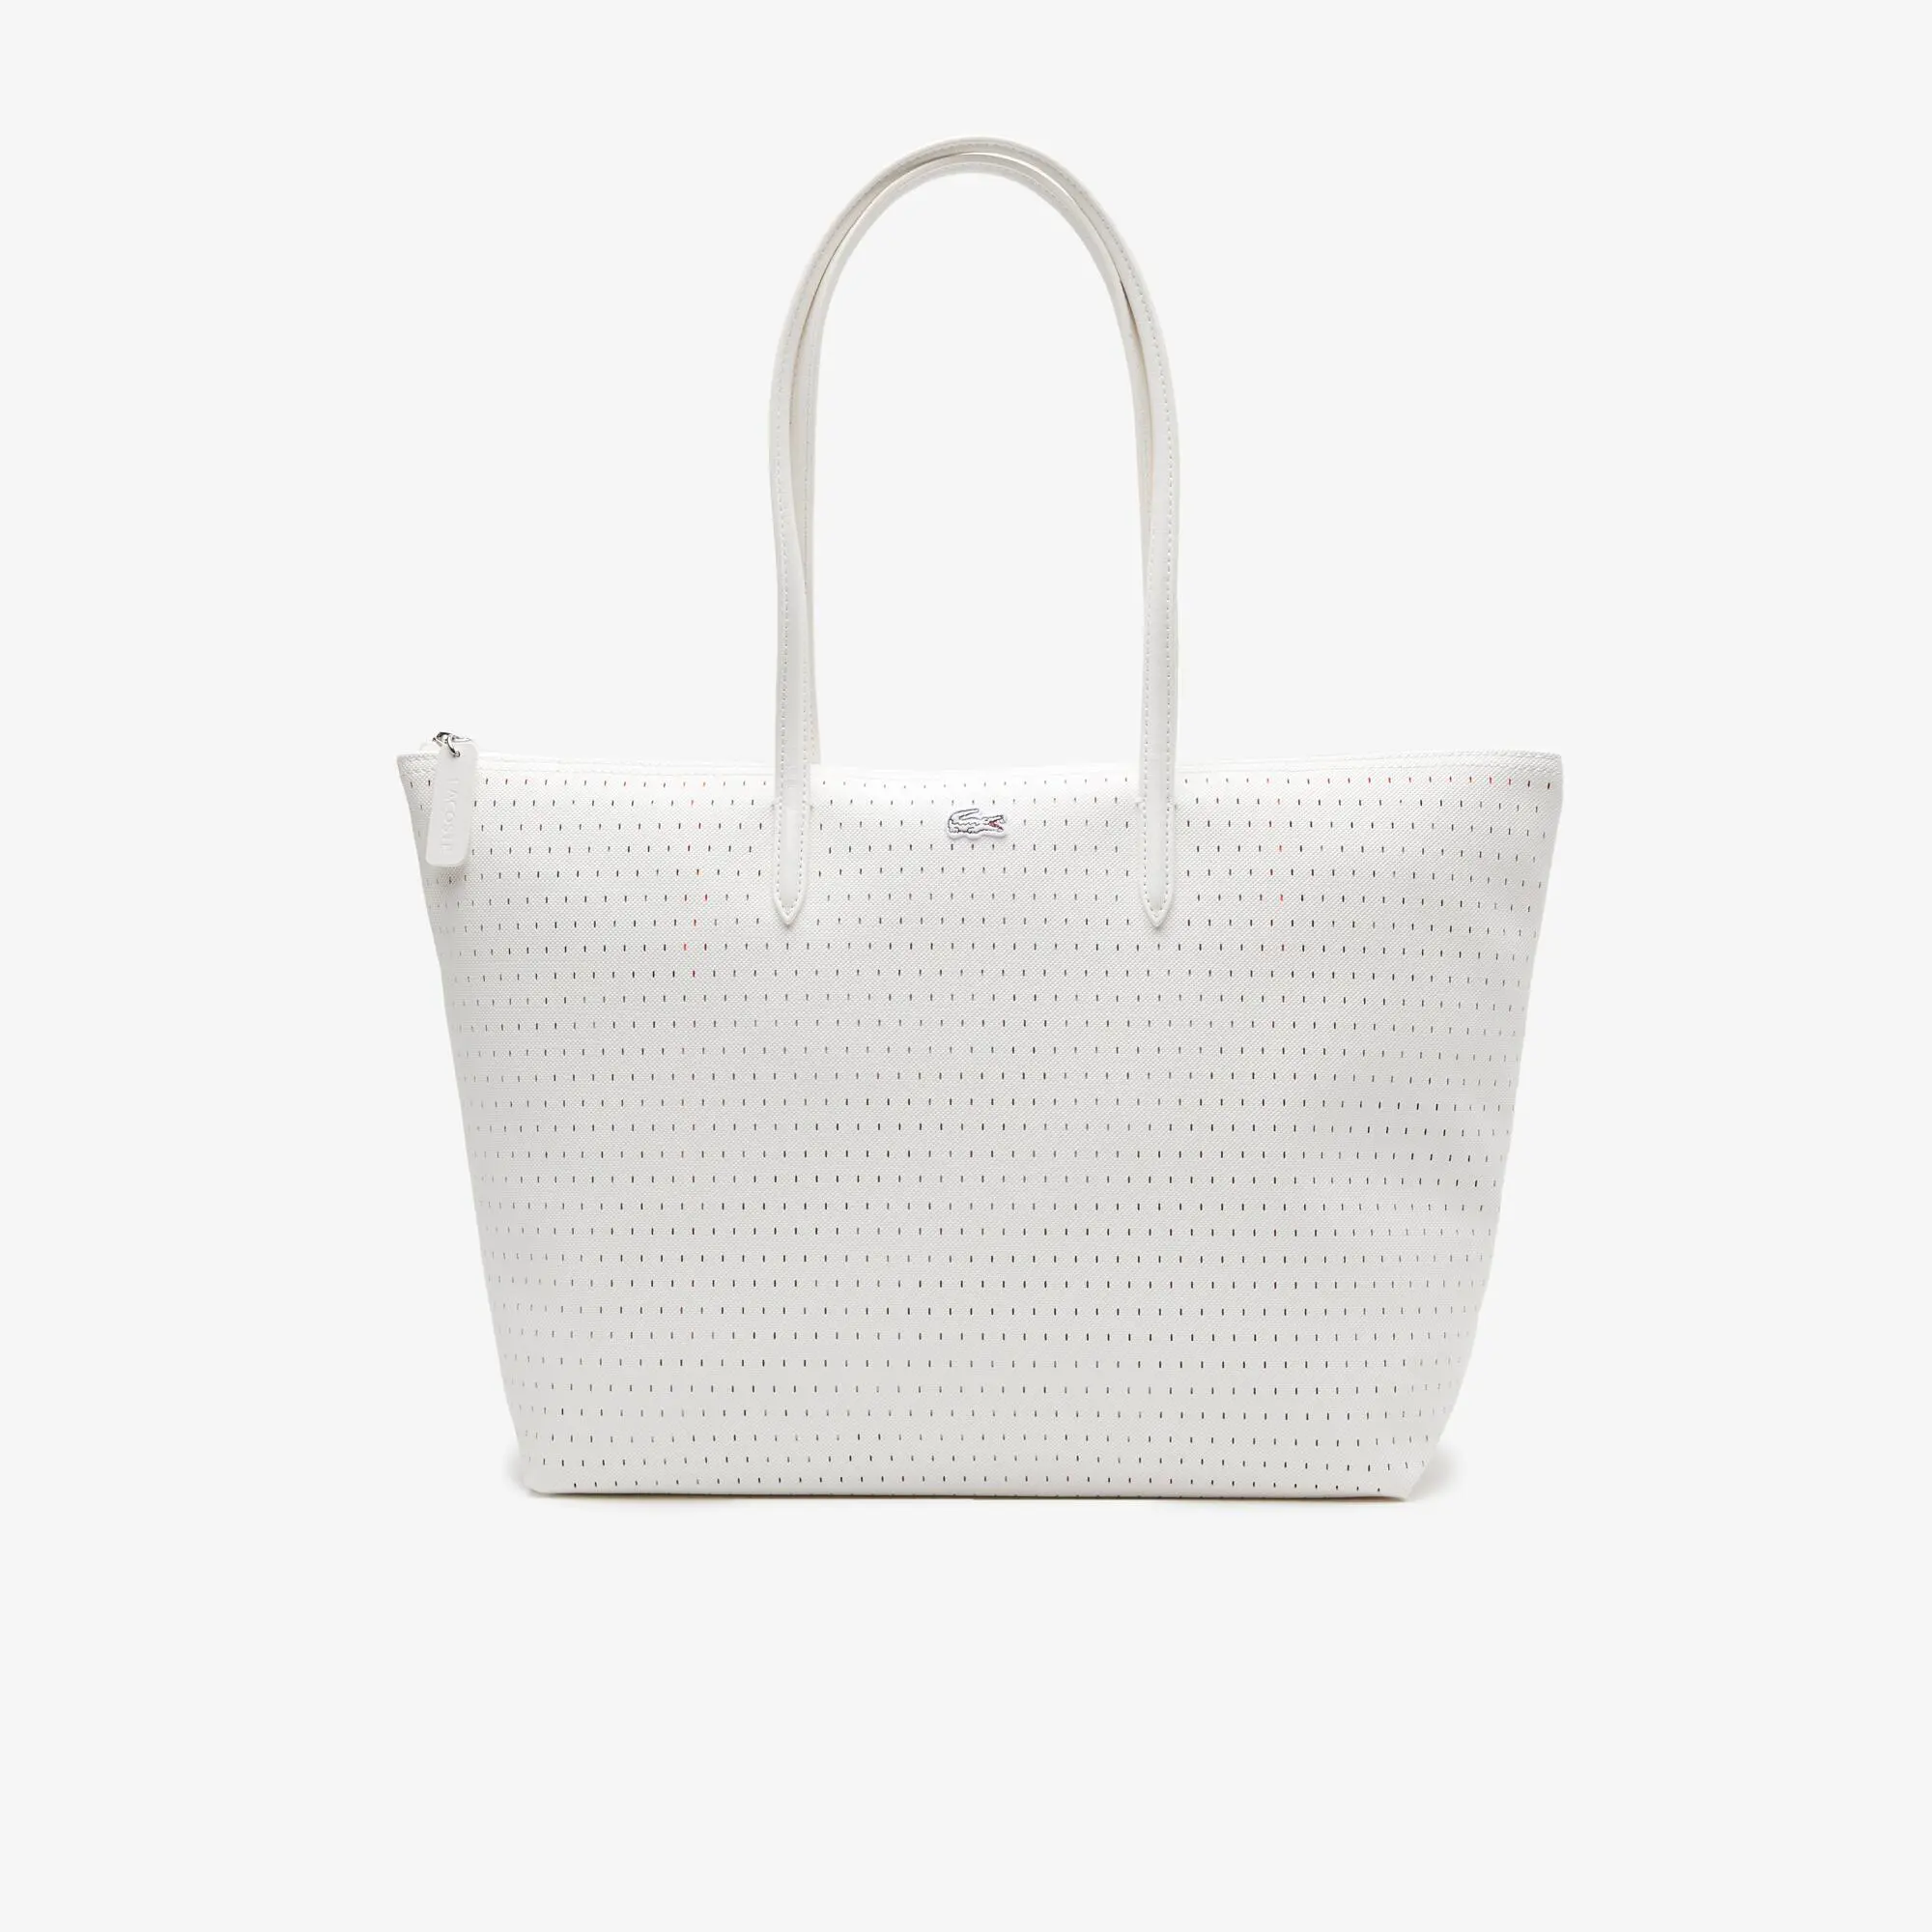 Lacoste Women’s Lacoste L.12.12 Large Perforated Tote. 1